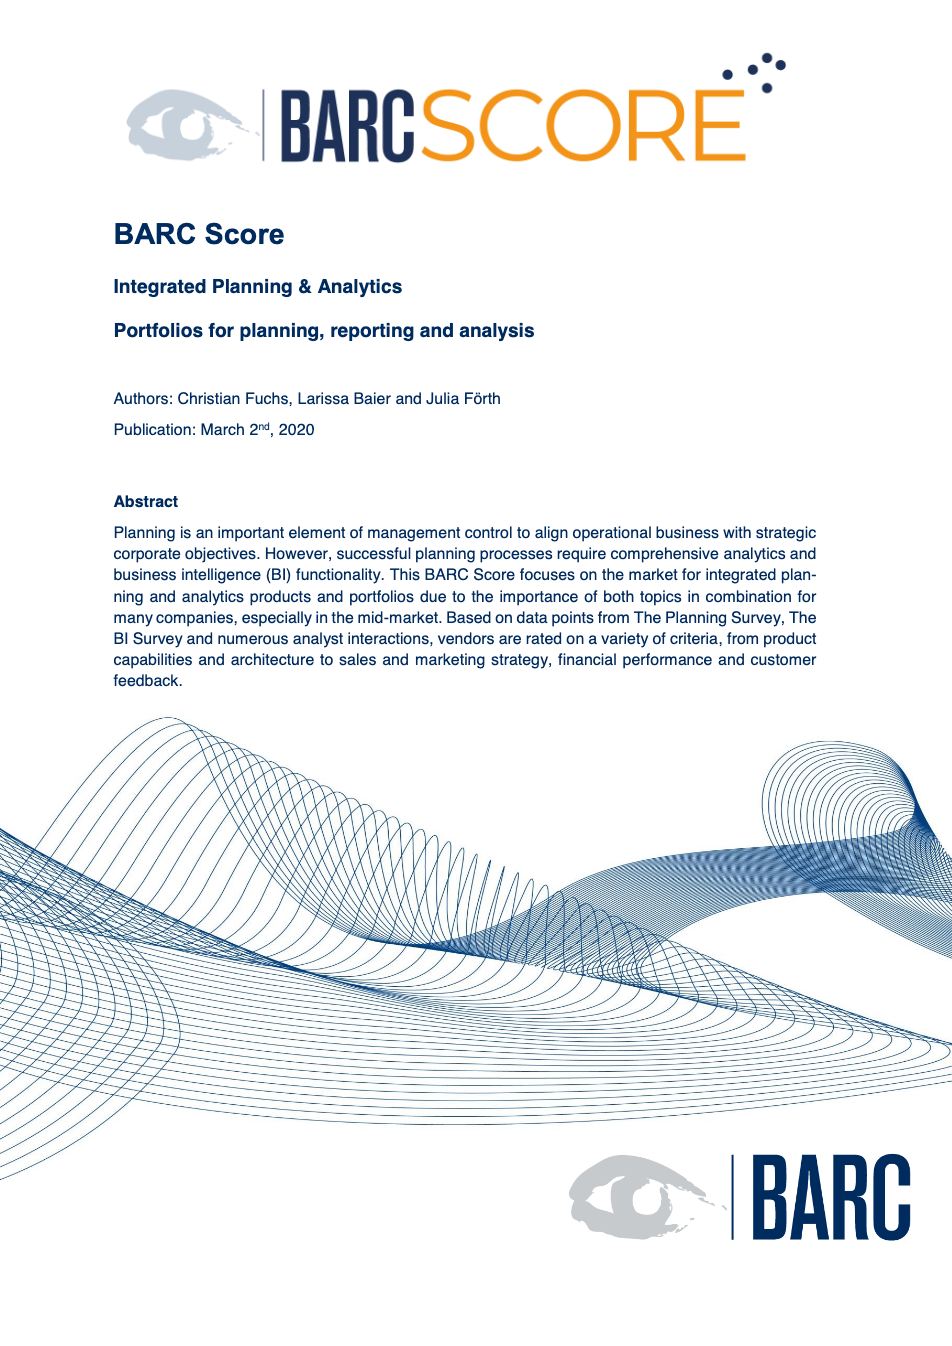 2020 03 02 BARC SCORE Integrated PLA A Vfin - BARC Score: Integrated Planning & Analytics Portfolios for planning, reporting and analysis